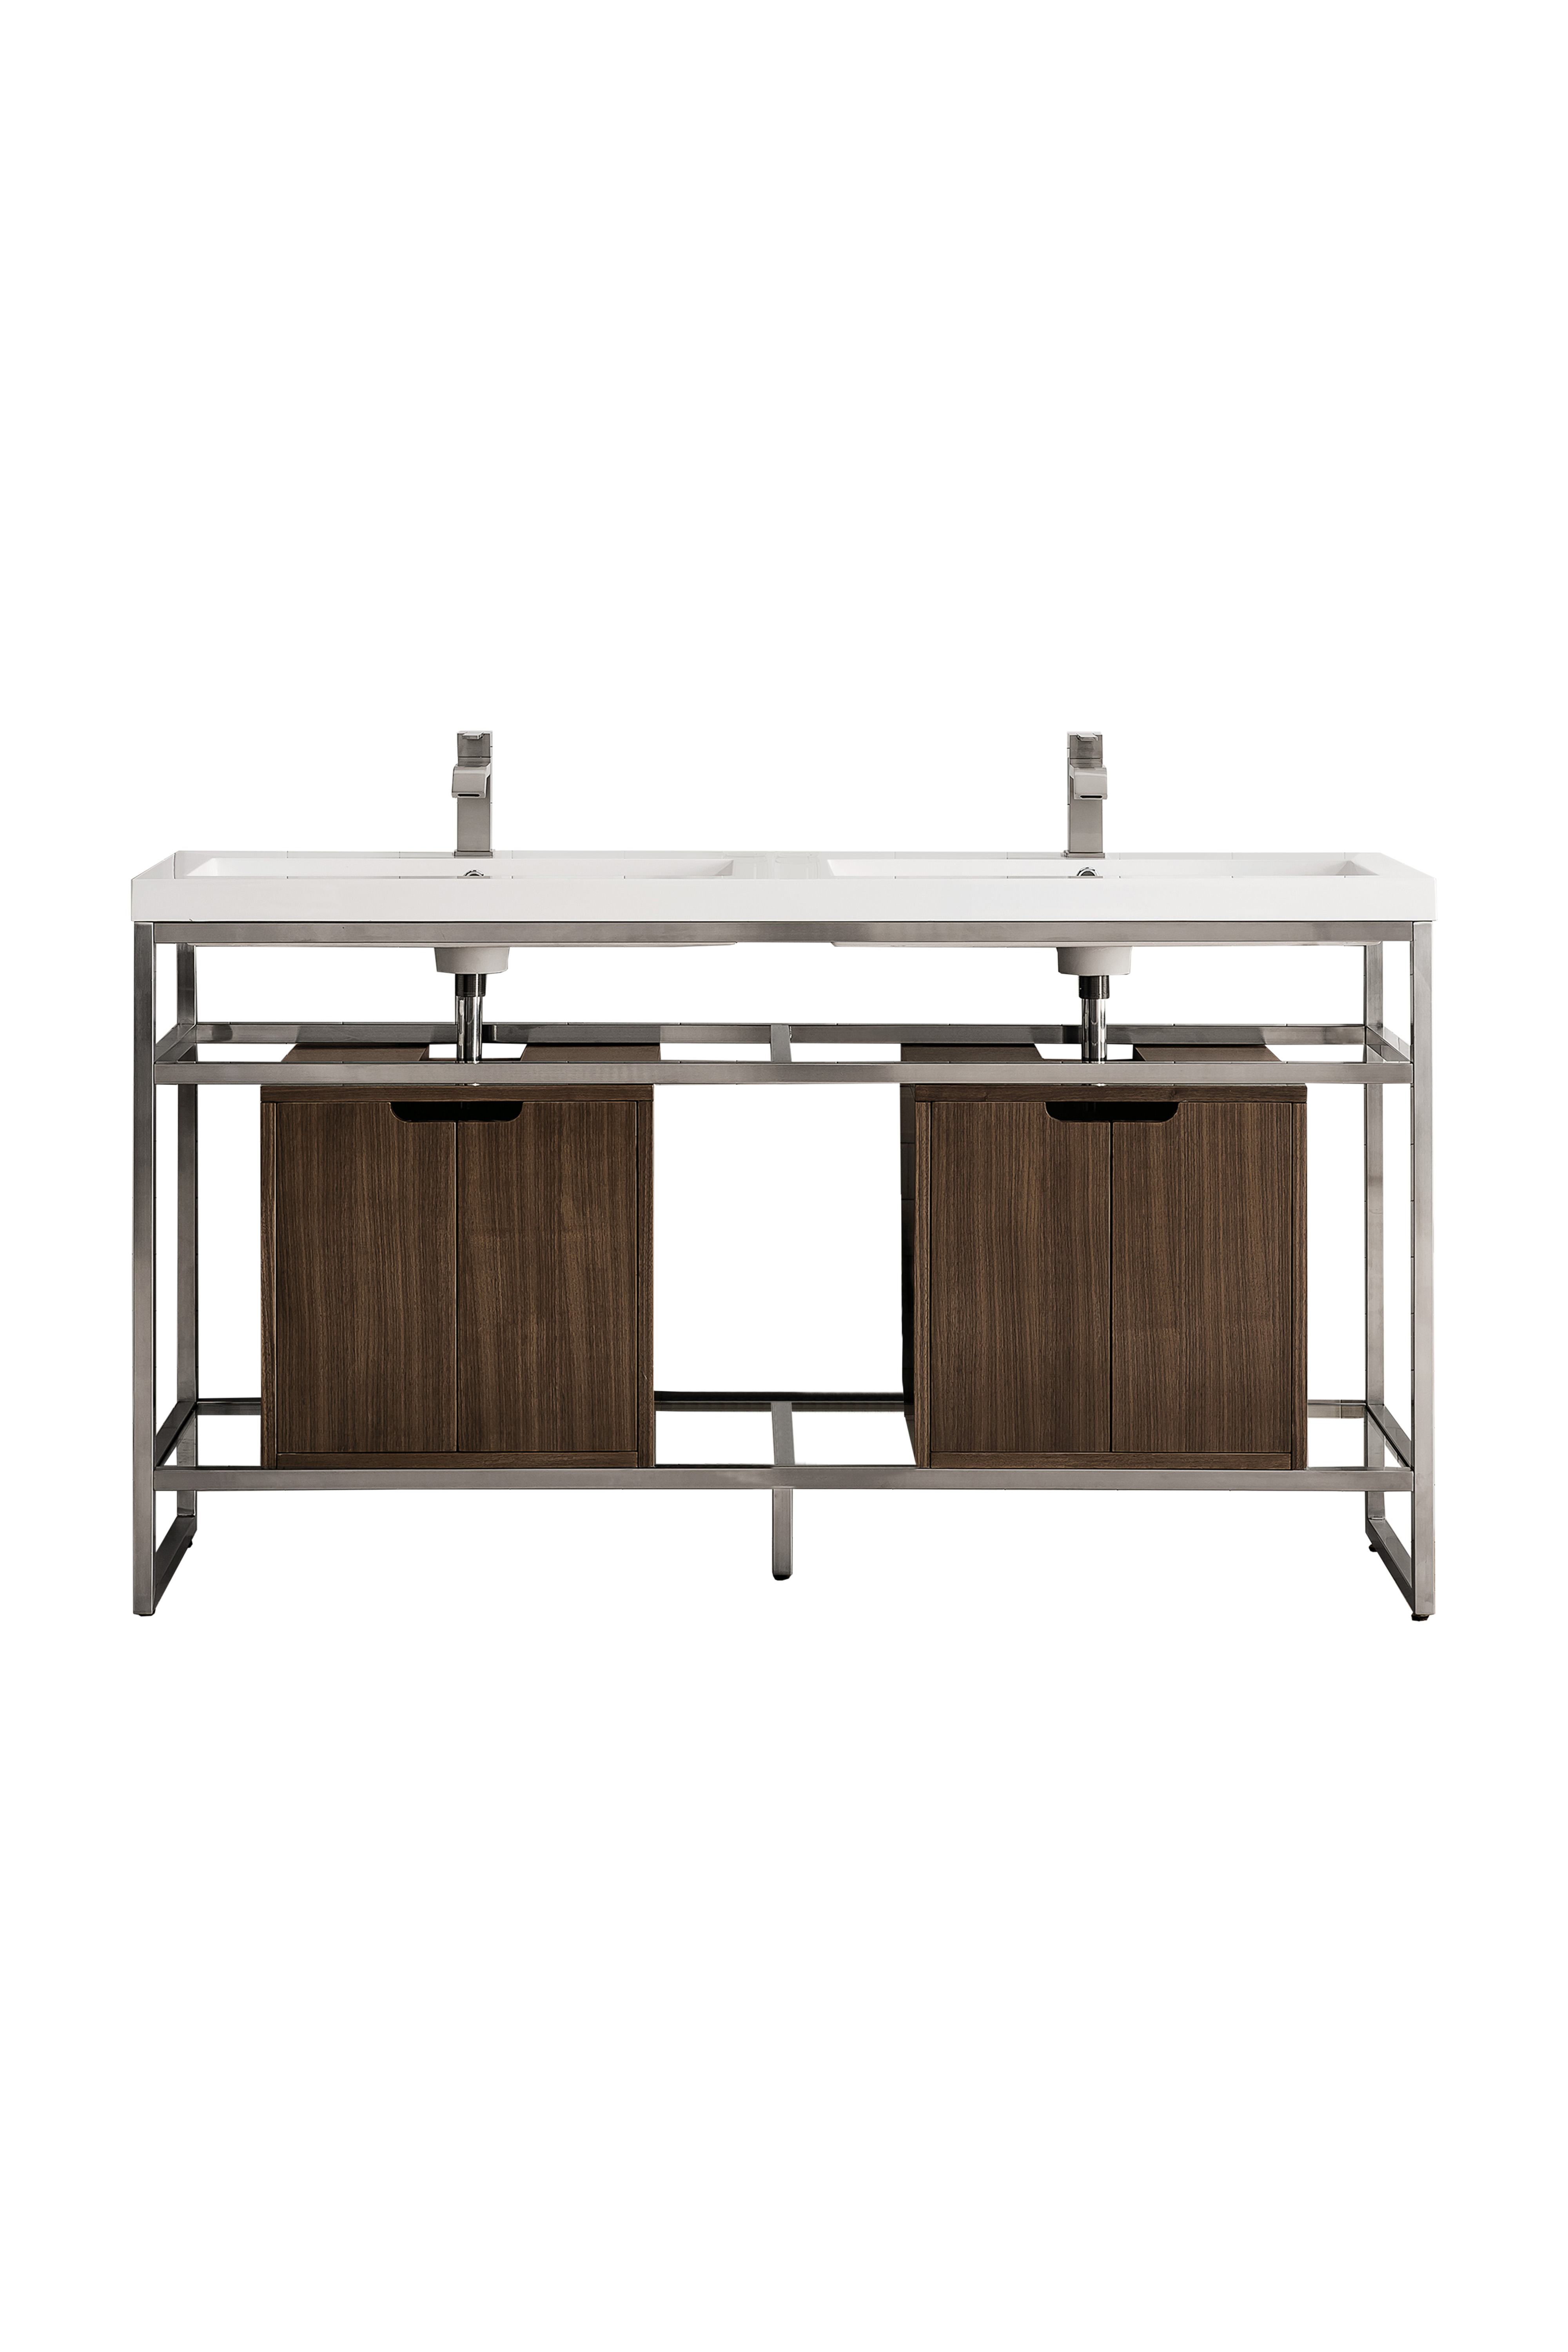 James Martin C105V63BNKSCWLTWG Boston 63" Stainless Steel Sink Console (Double Basins), Brushed Nickel w/ Mid Century Walnut Storage Cabinet, White Glossy Composite Countertop